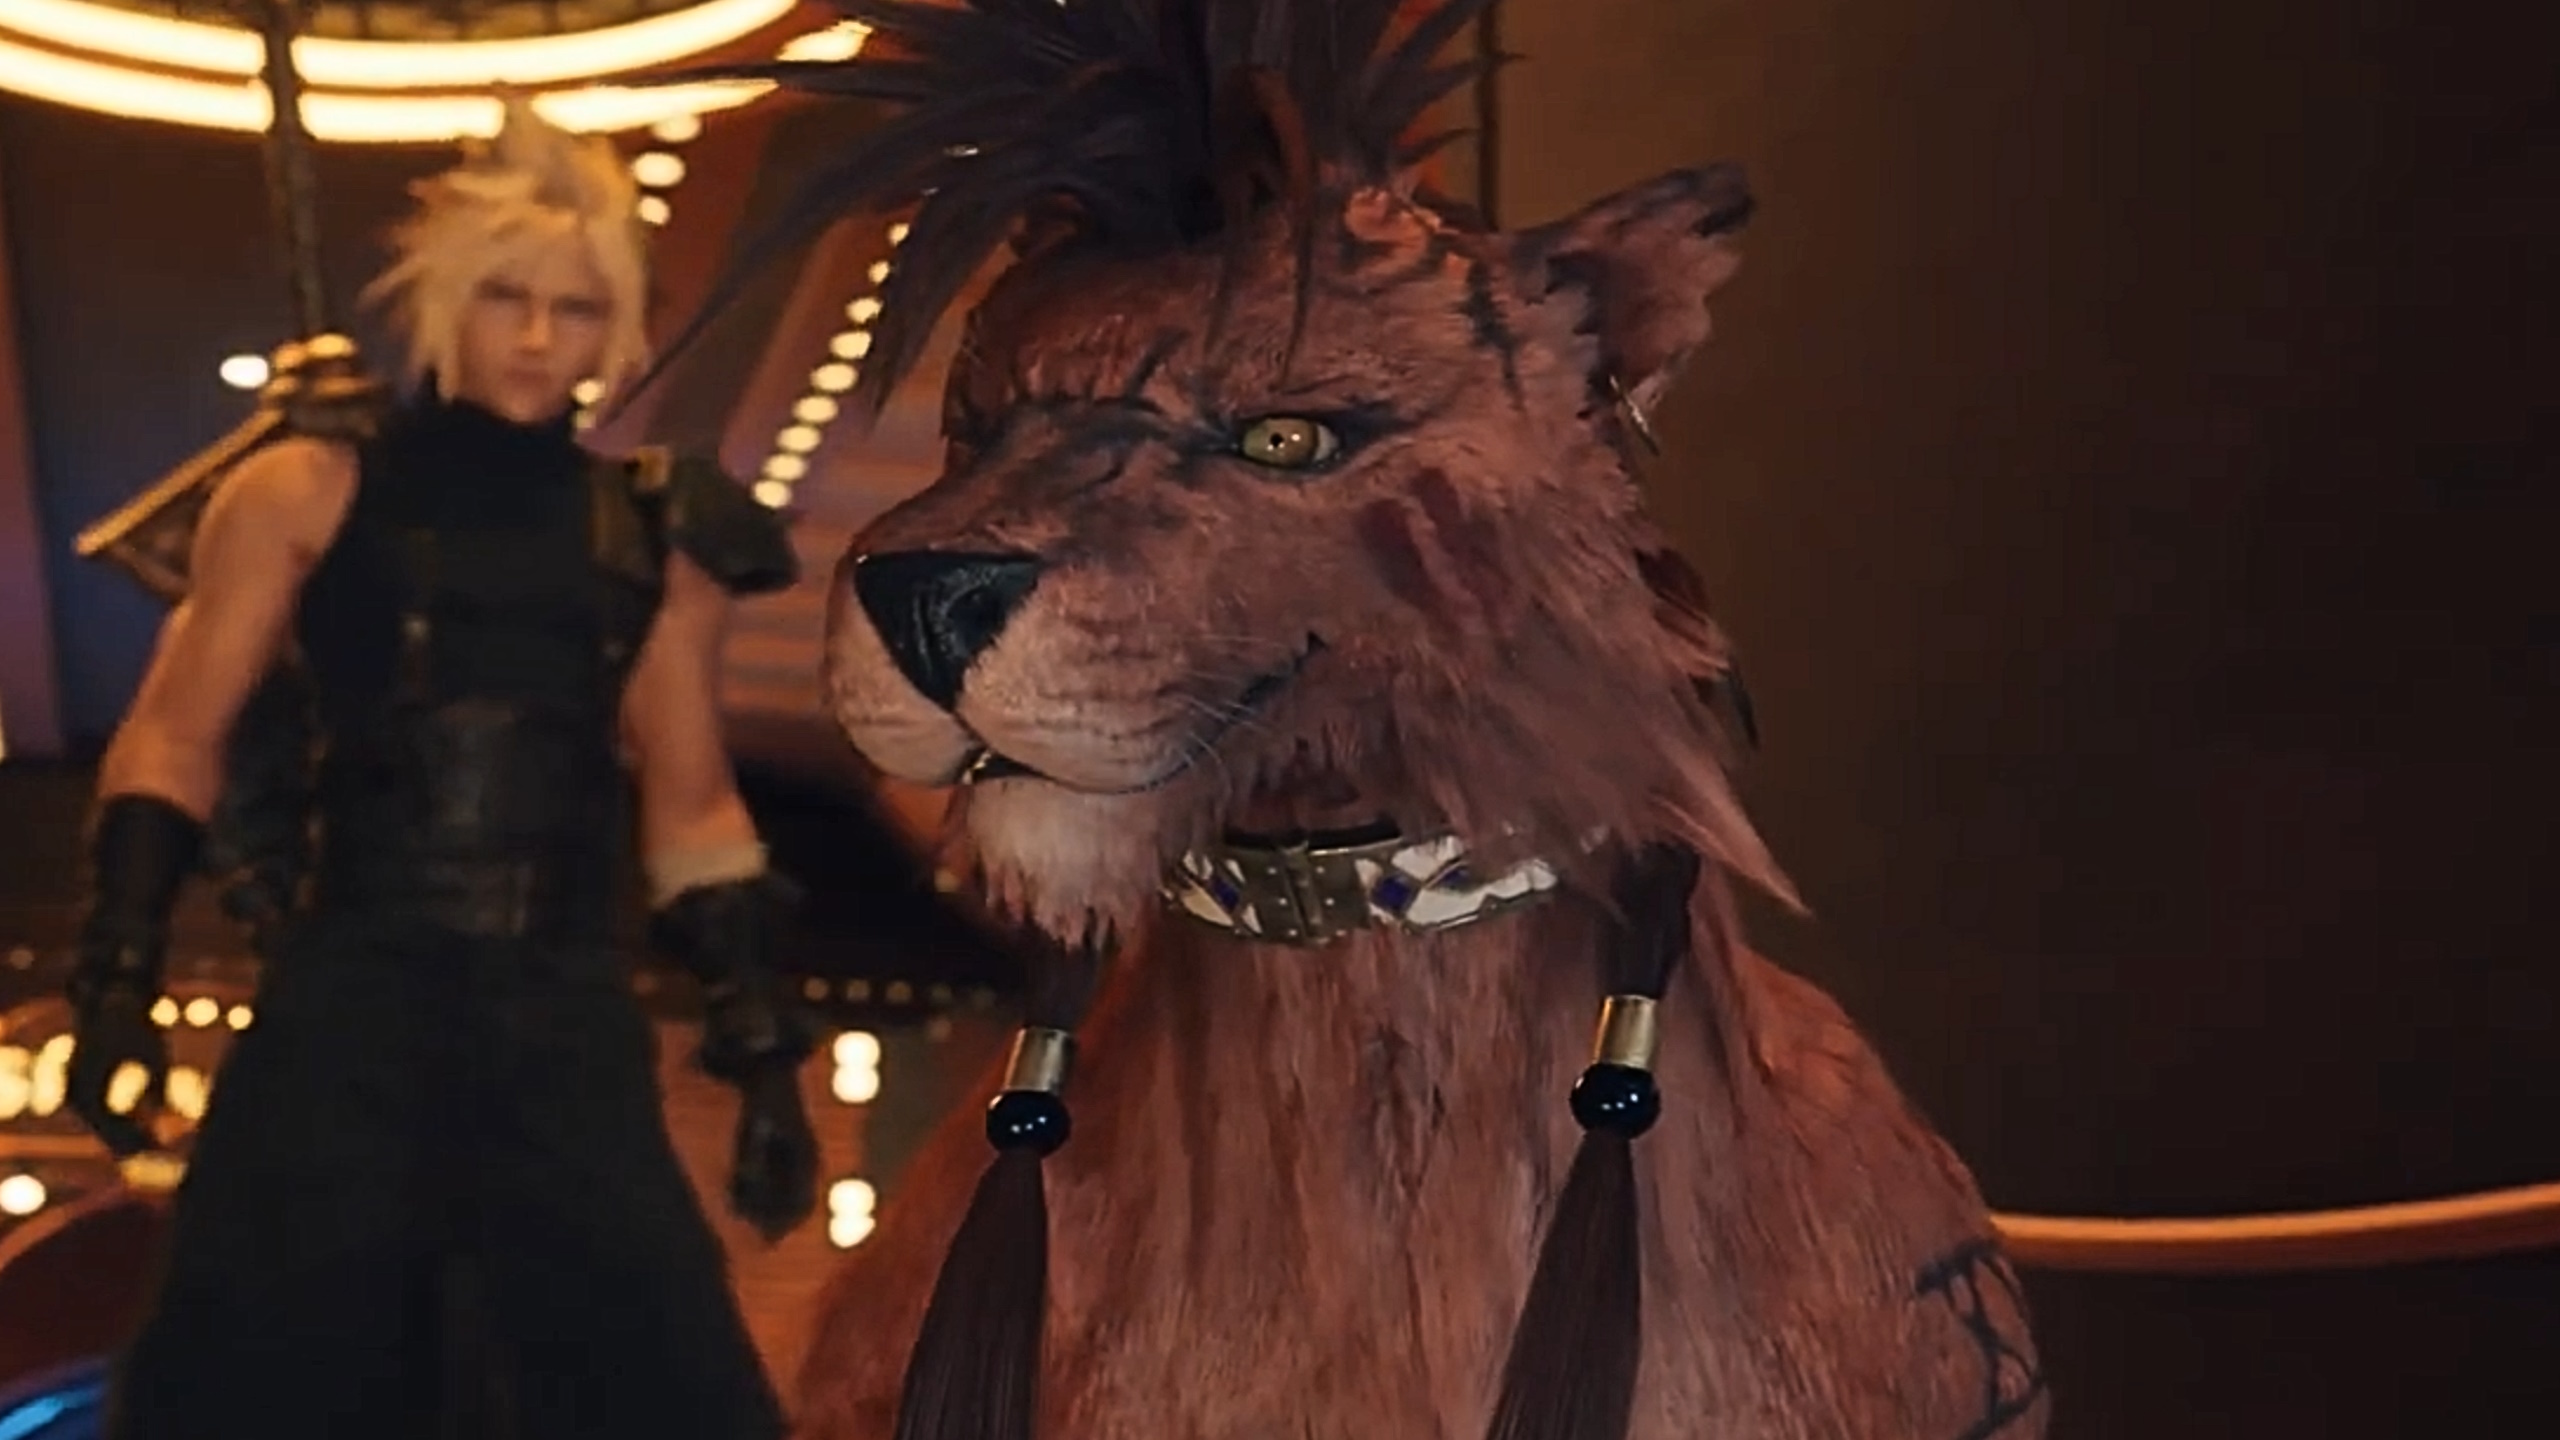 Final Fantasy 7 Rebirth's Red XIII with perked-up ears and bright eyes, looking at the Gold Saucer's Ferris wheel